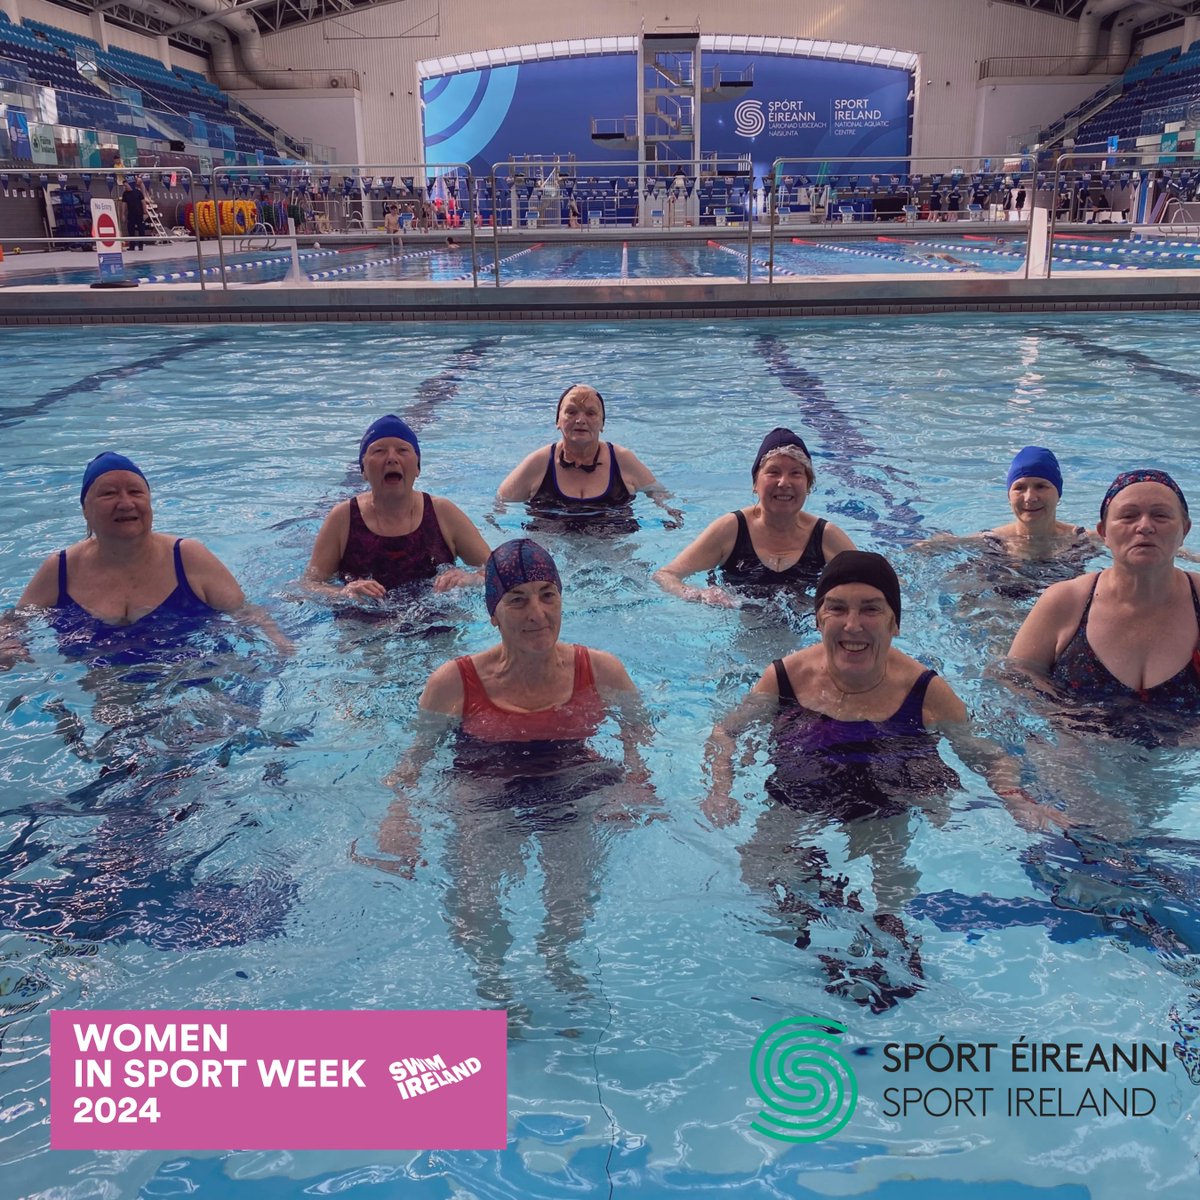 𝗪𝗼𝗺𝗲𝗻 𝗶𝗻 𝗦𝗽𝗼𝗿𝘁 𝗪𝗲𝗲𝗸 𝟮𝟬𝟮𝟰 It was fantastic to host a Swim Ireland Aqua Aerobics class in partnership with Fingal Sport in the Sport Ireland NAC to celebrate Women in Sport Week! This programme has a huge benefit to participants led by enthusiastic instructors…